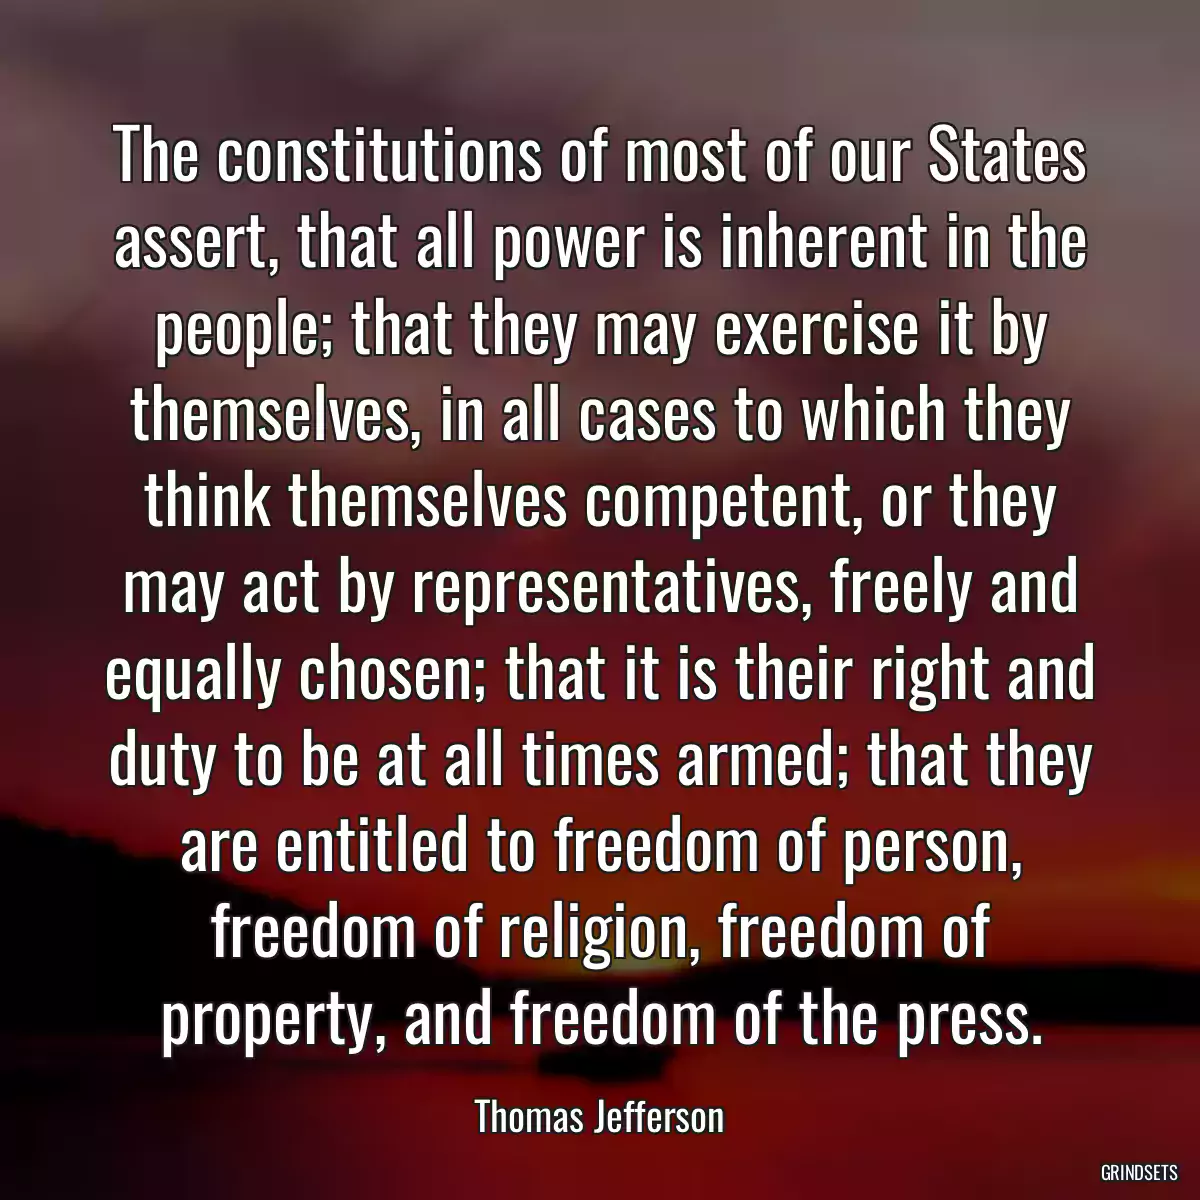 The constitutions of most of our States assert, that all power is inherent in the people; that they may exercise it by themselves, in all cases to which they think themselves competent, or they may act by representatives, freely and equally chosen; that it is their right and duty to be at all times armed; that they are entitled to freedom of person, freedom of religion, freedom of property, and freedom of the press.